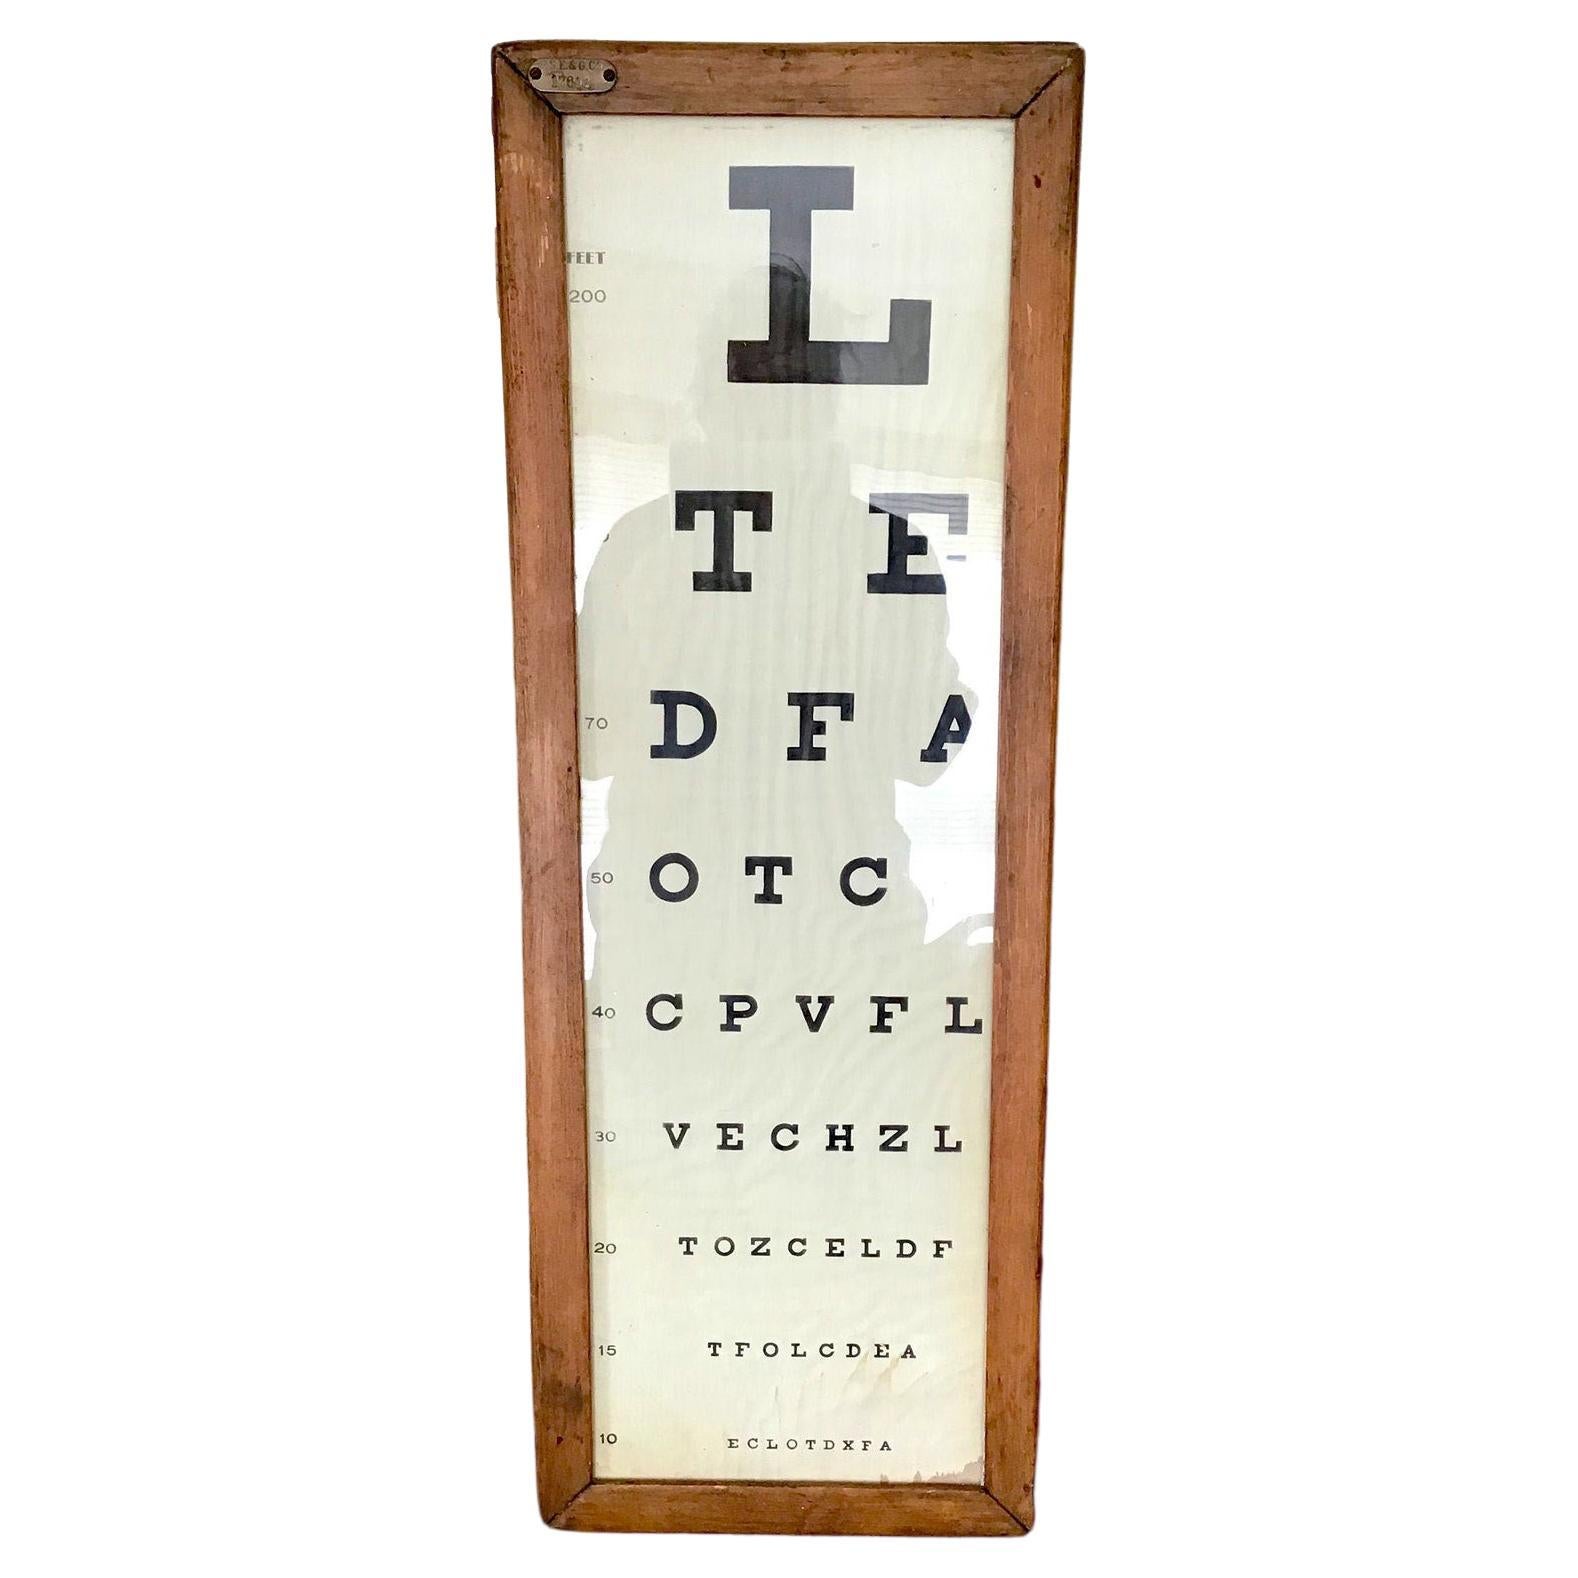 Optometrist eye chart cabinet, antique eye chart, light up eye chart,
optometrist eye test, PSEG optical collectible, steam punk supply,

This looks homemade, but there is a PSEG label and number on it. It was made to light up, but there is no